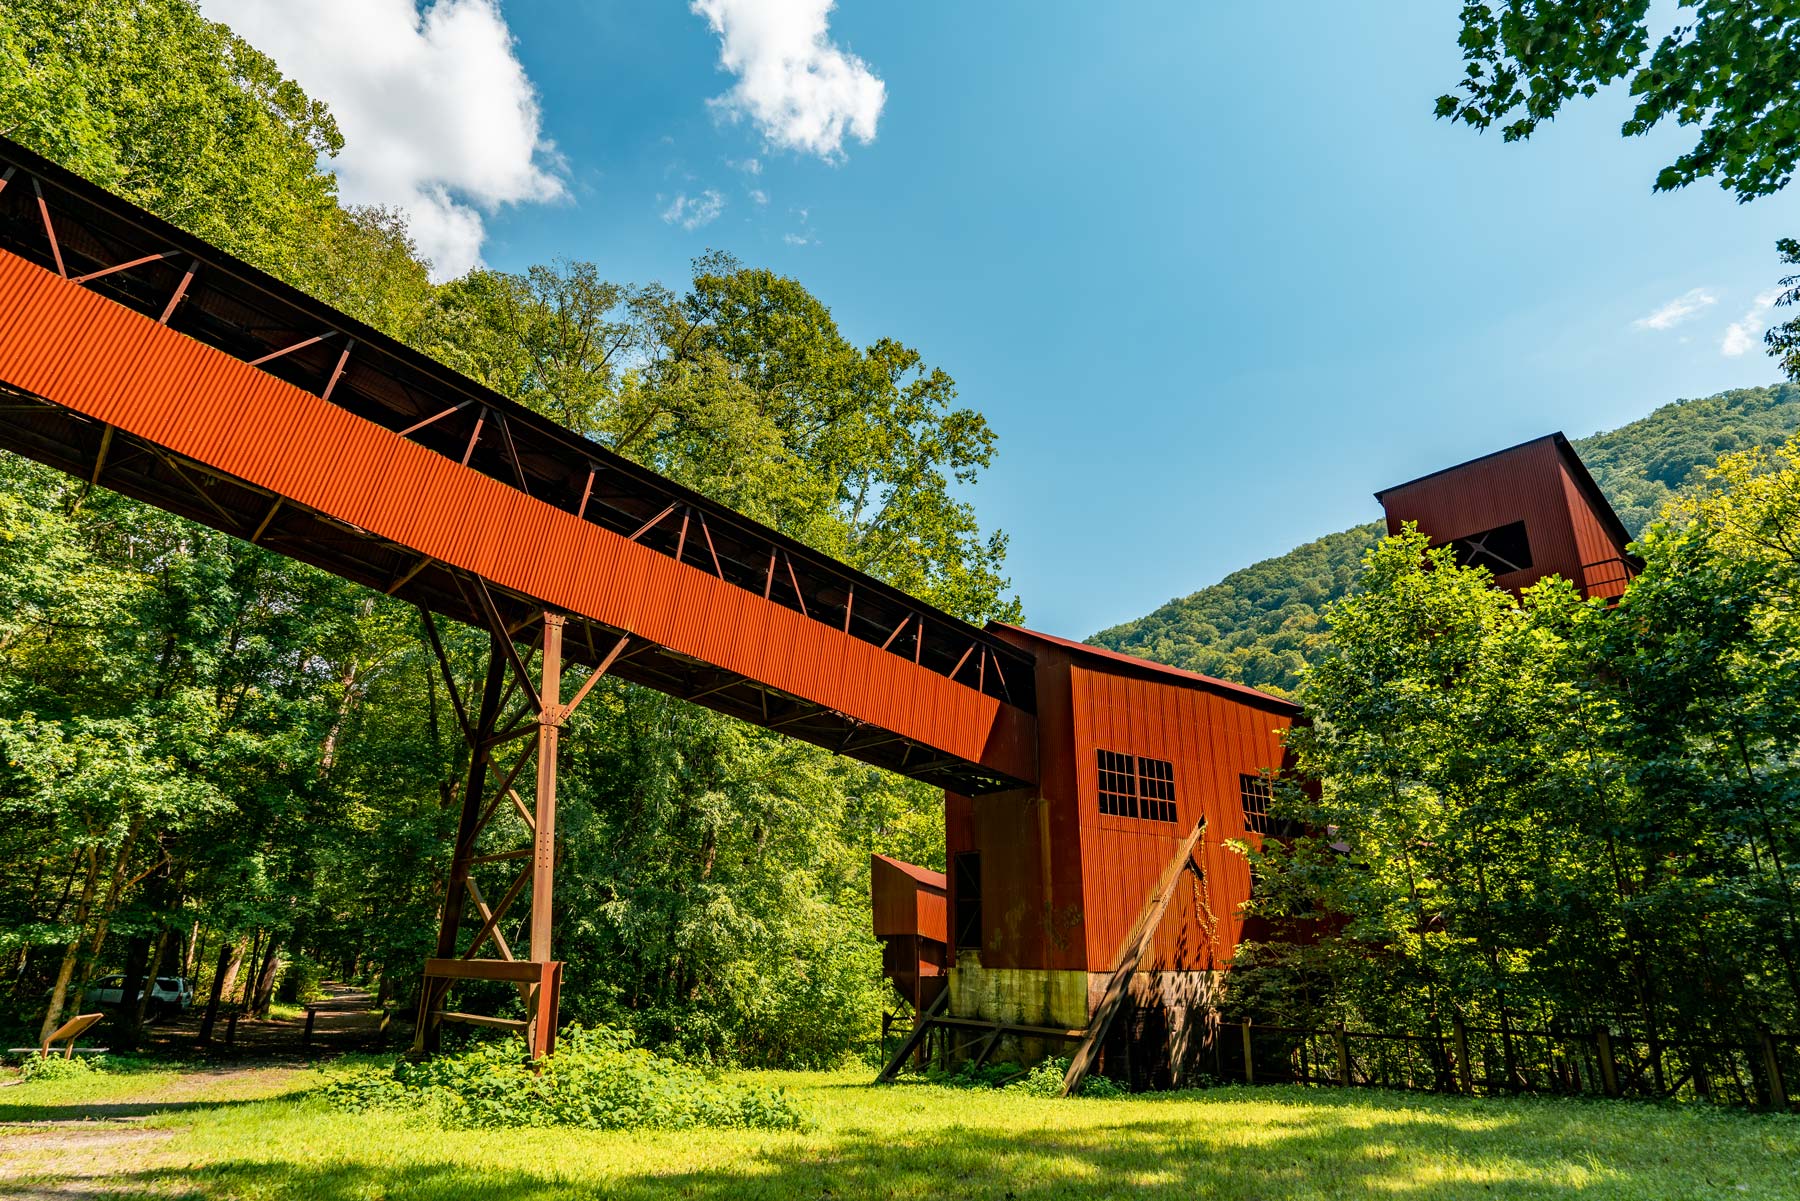 things to do new river gorge national park, new river gorge national park west virginia, nuttalburg coal tipple